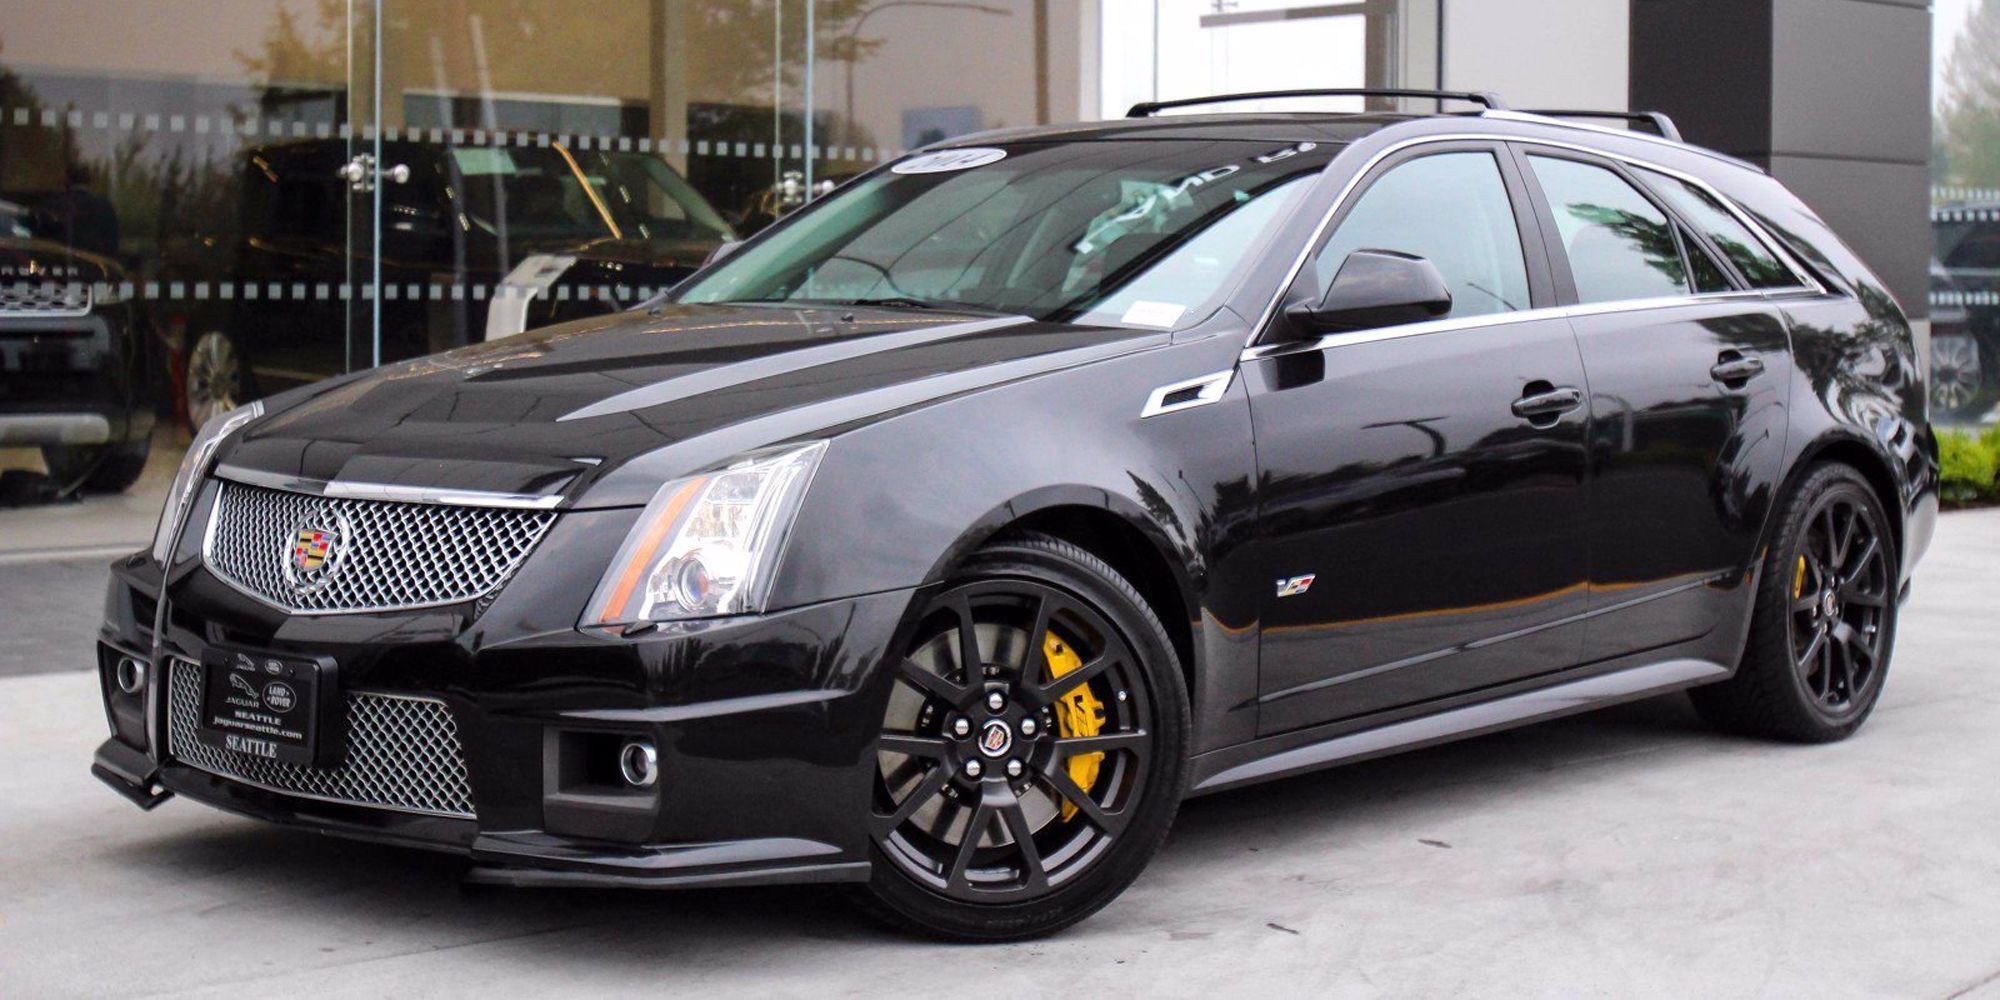 Front 3/4 view of the CTS-V Wagon in black